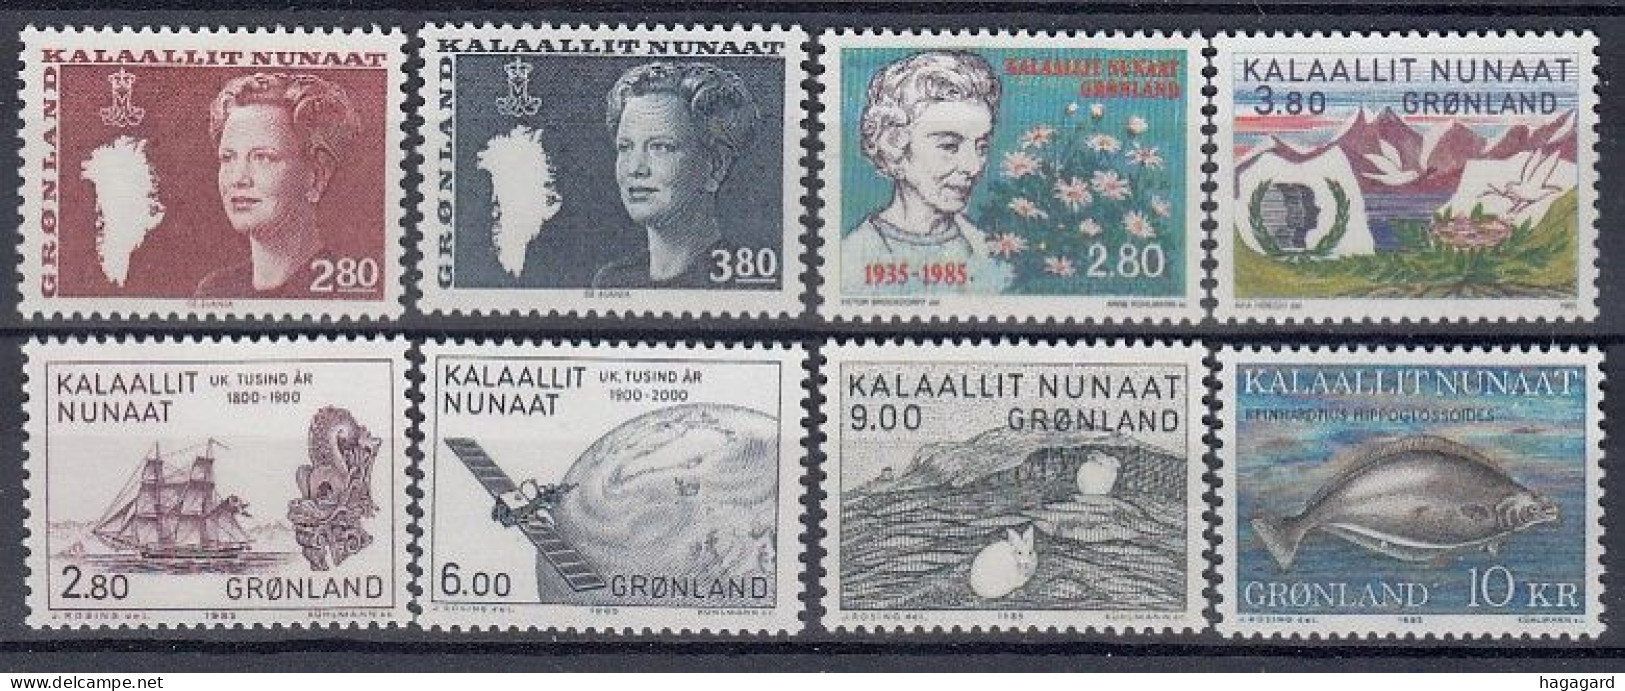 G2208. Greenland 1985. Complete Year Set. Michel 155-62. (15.10€). MNH(**) - Annate Complete